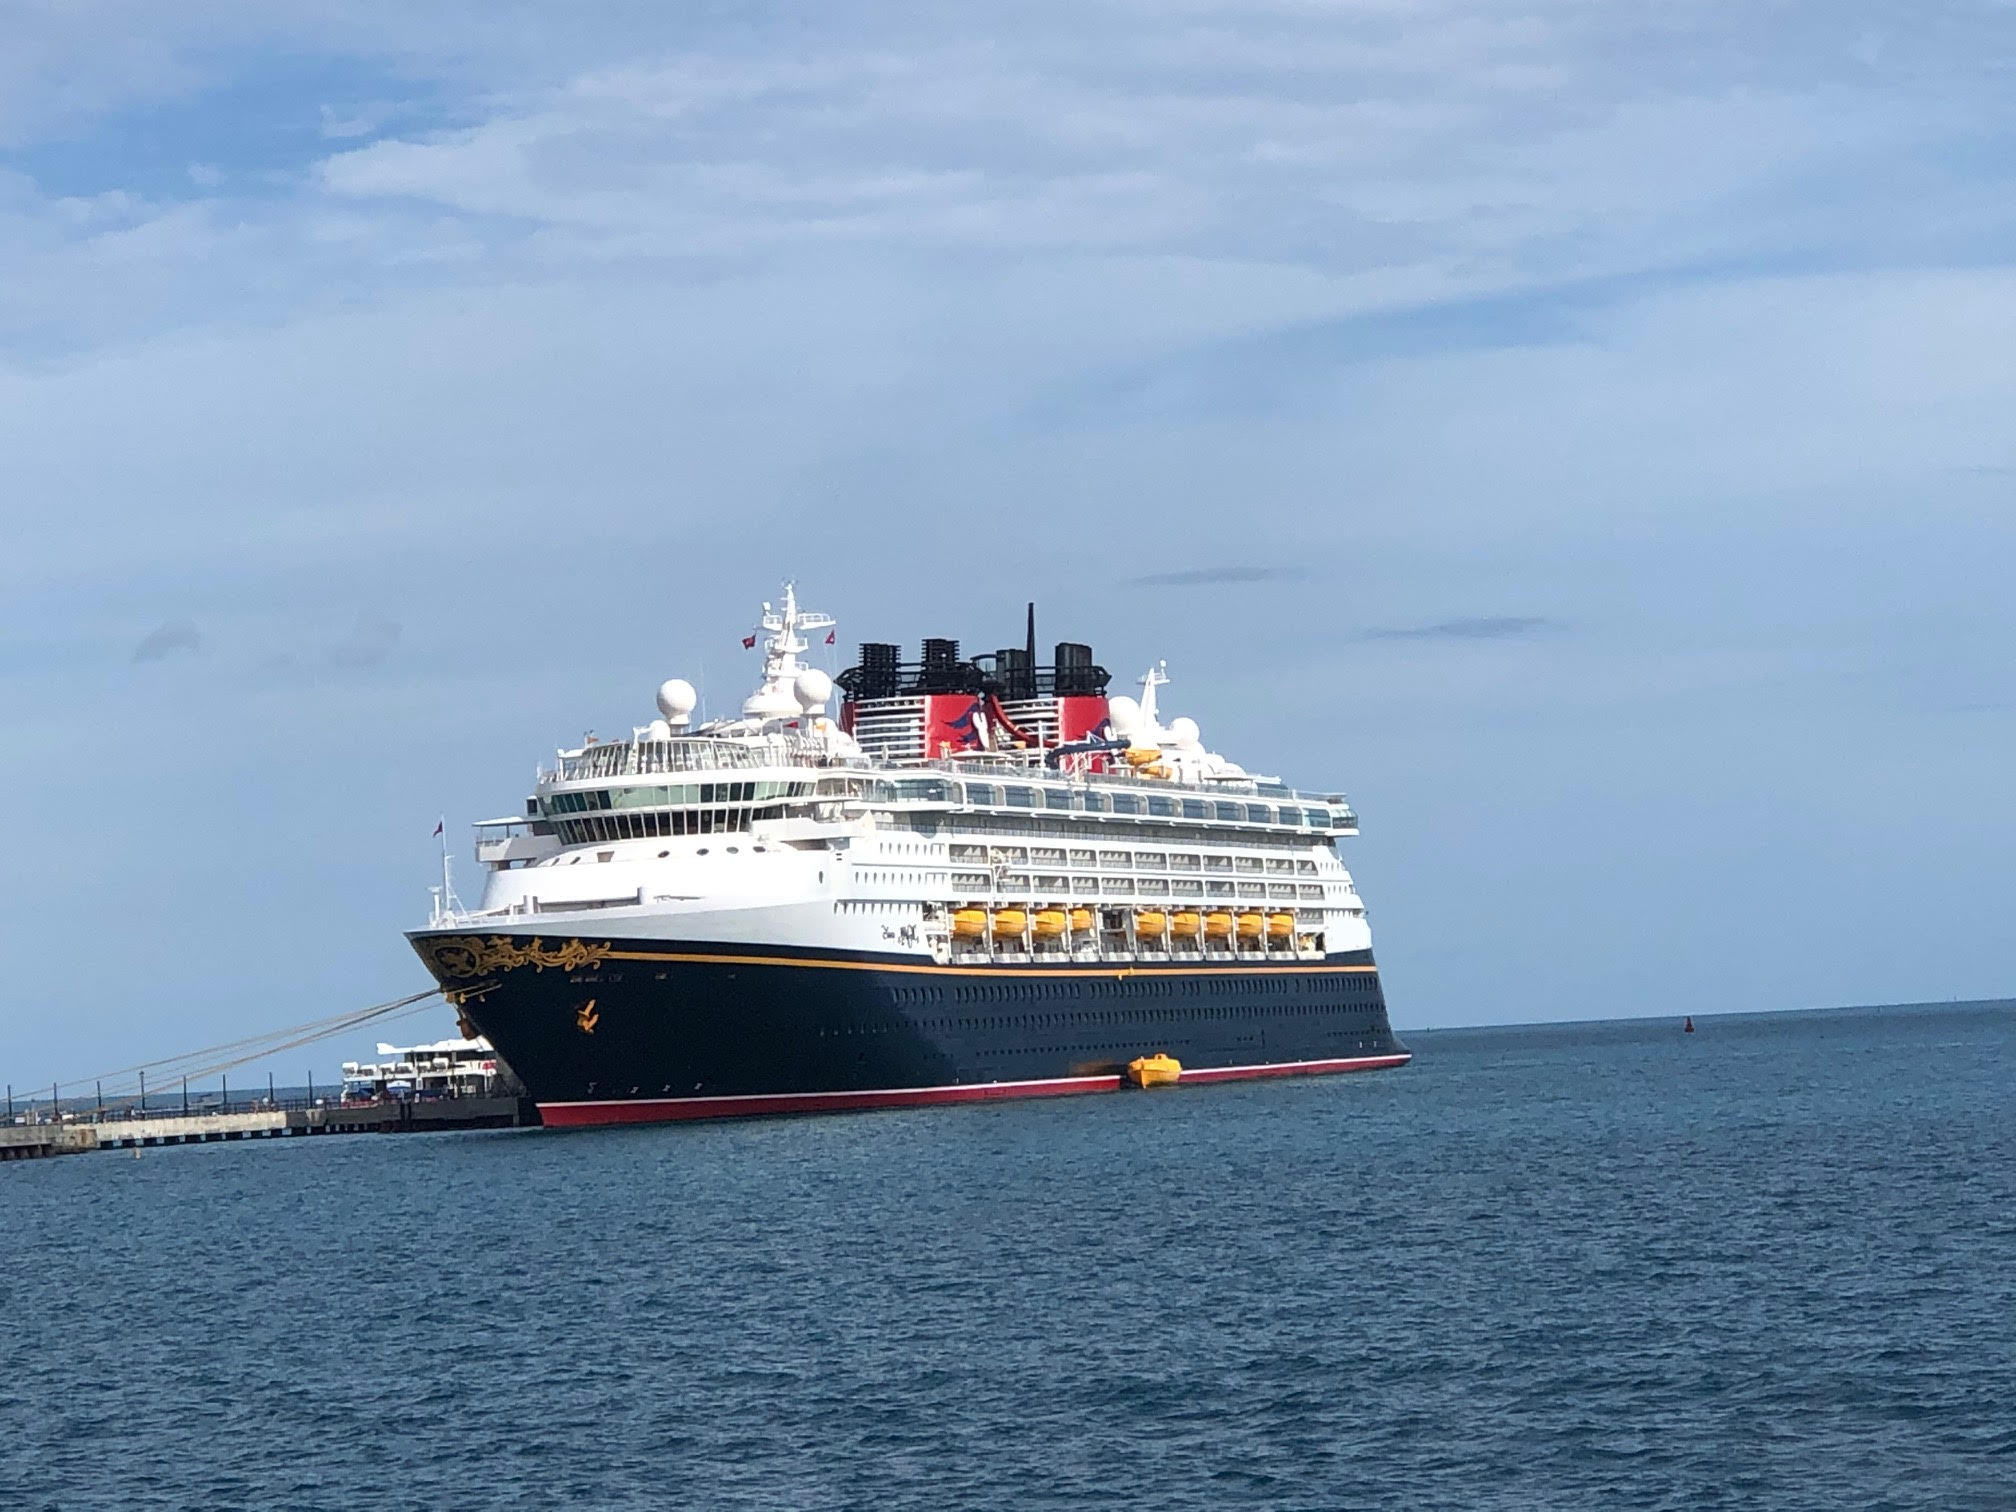 Disney Cruise Ship seen from the harbor on the ocean